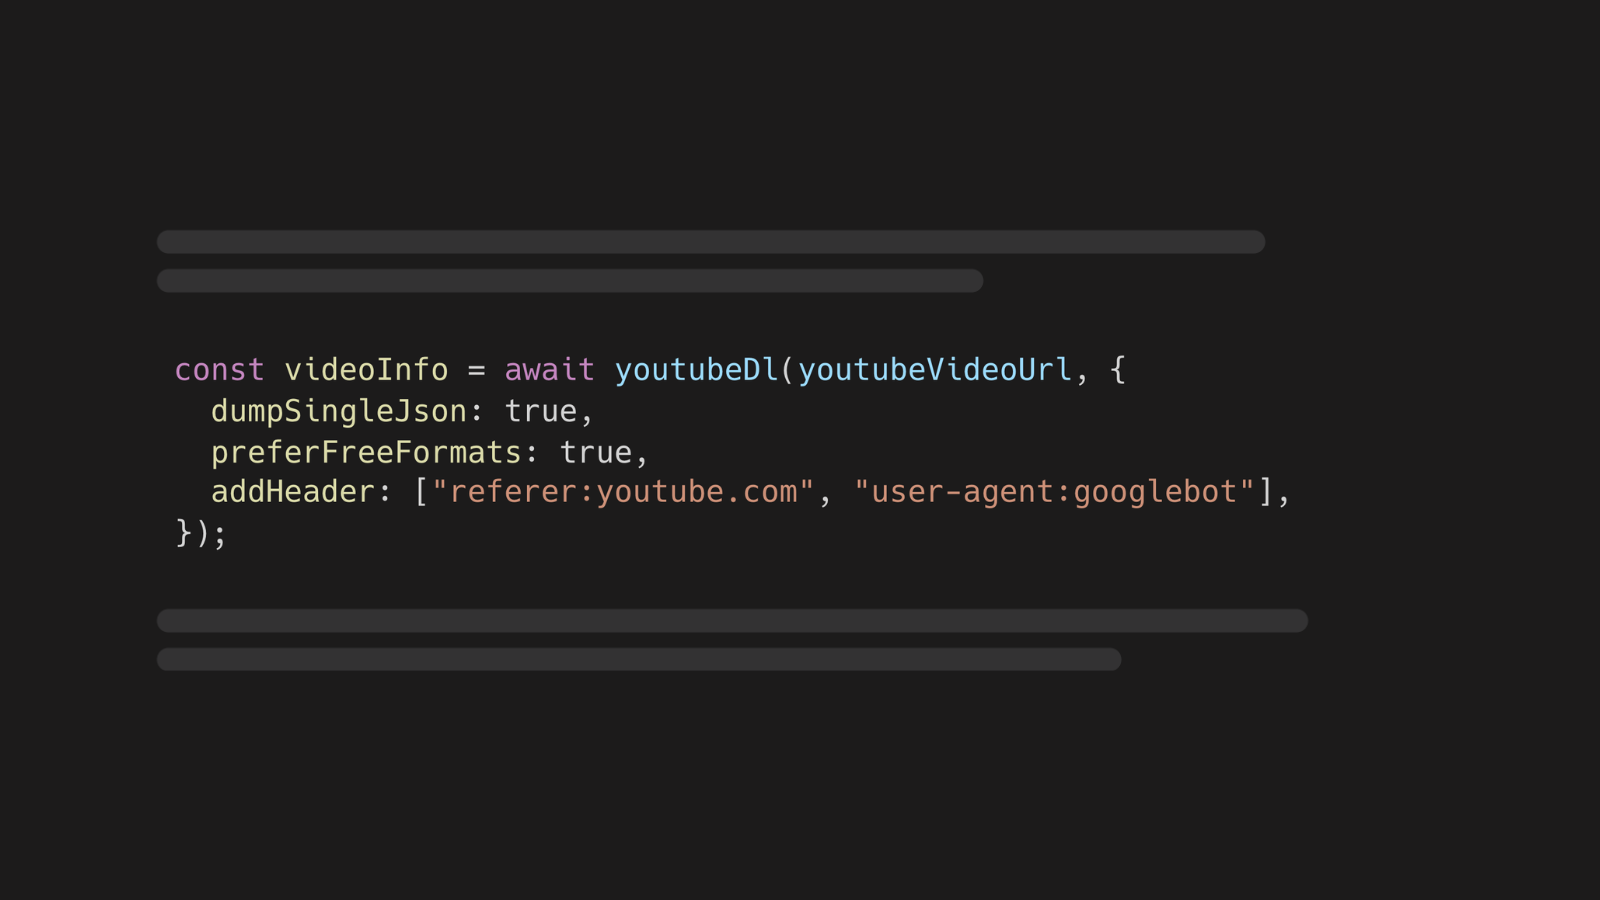 JavaScript code to retrieve information from a YouTube video